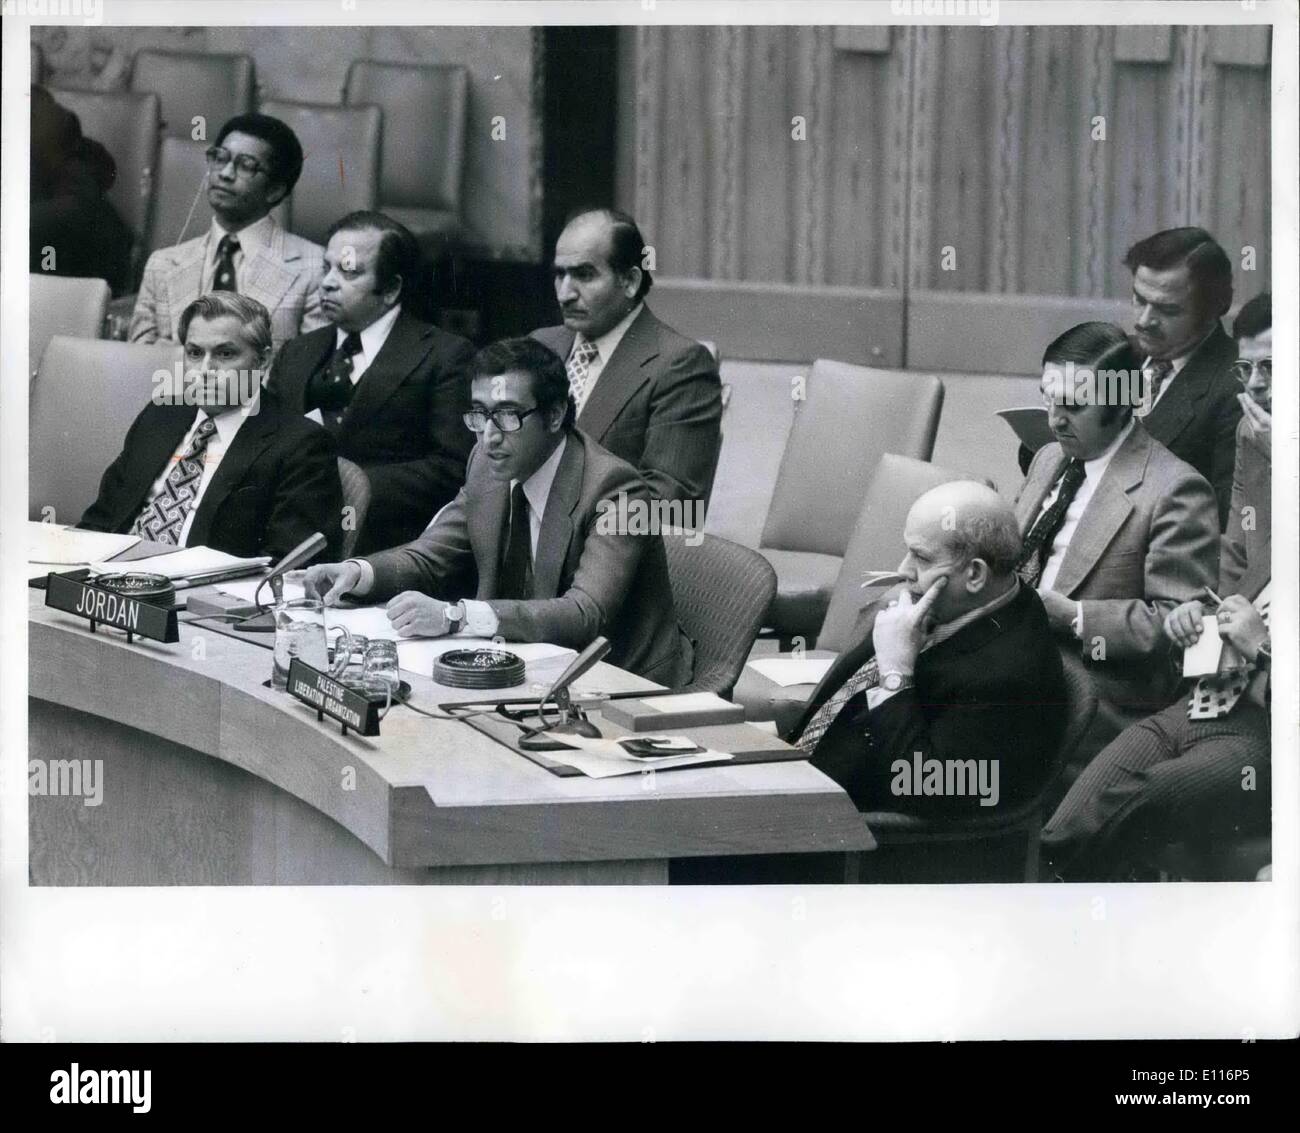 Mar. 03, 1976 - Security Council Continues debate on Developments in Occupied Arab Territories: United Nations, New York, 22 March 1976 The Security Council heard six speaker this afternoon as it continued debate on ''the serious situation arising from recent developments'' in the Arab territories occupied by Israel. Statements were made by the representative of Jordan, Syria,Israel, Yugoslavia, Pakistan and Saudi Arabia. Abdul Hamid Sharaf (Jordan) making a statement. At the table at right is Zehdi Ladib Terzi, representative of the PLO. Stock Photo